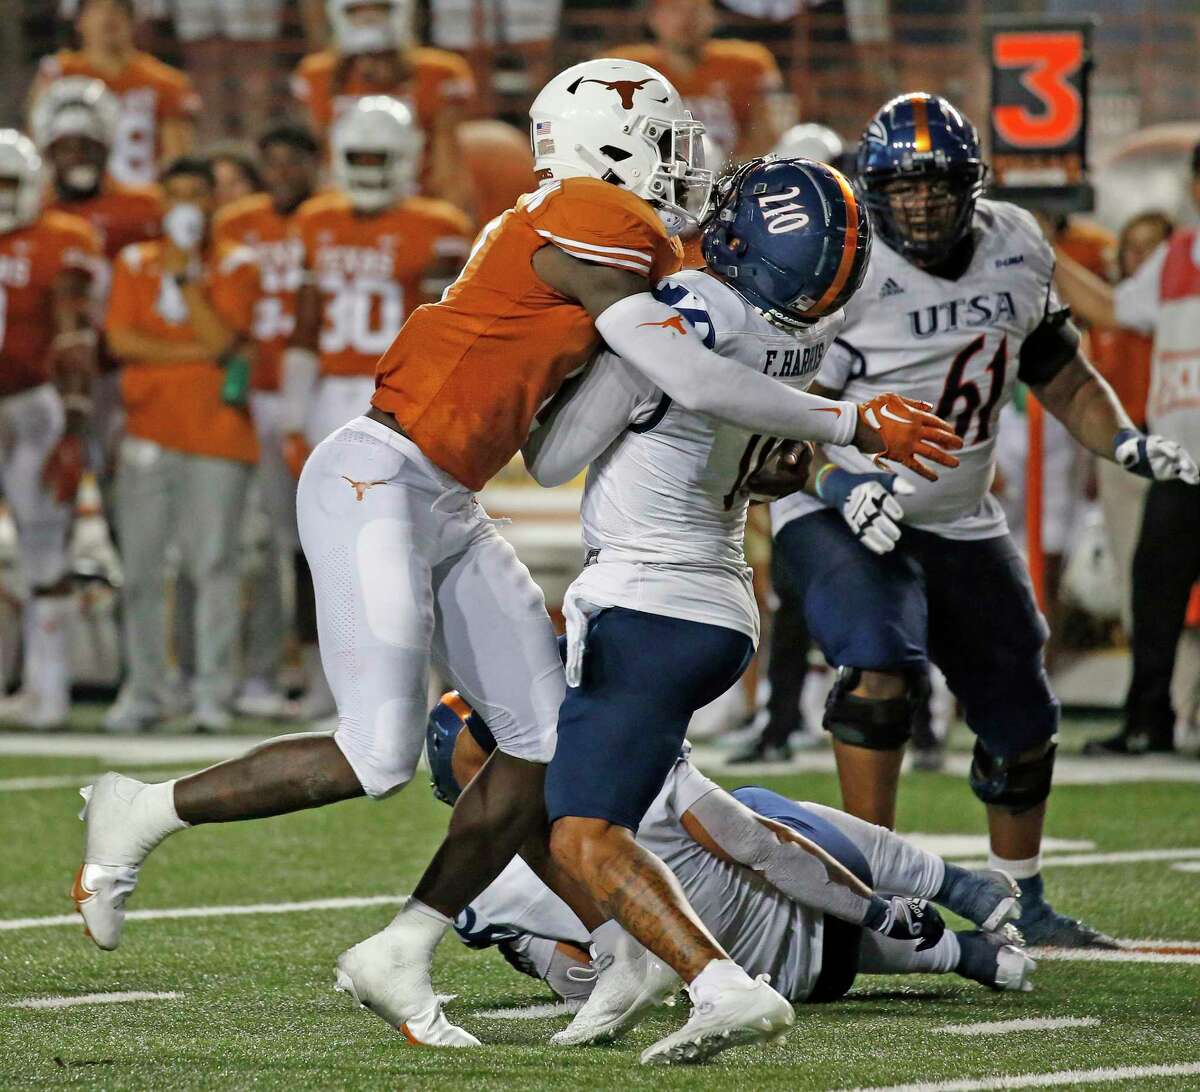 The NCAA upheld a targeting penalty against Texas linebacker DeMarvion Overshown even though his helmet-to-helmet contact with UTSA quarterback Frank Harris in Saturday’s game appeared to be incidental.